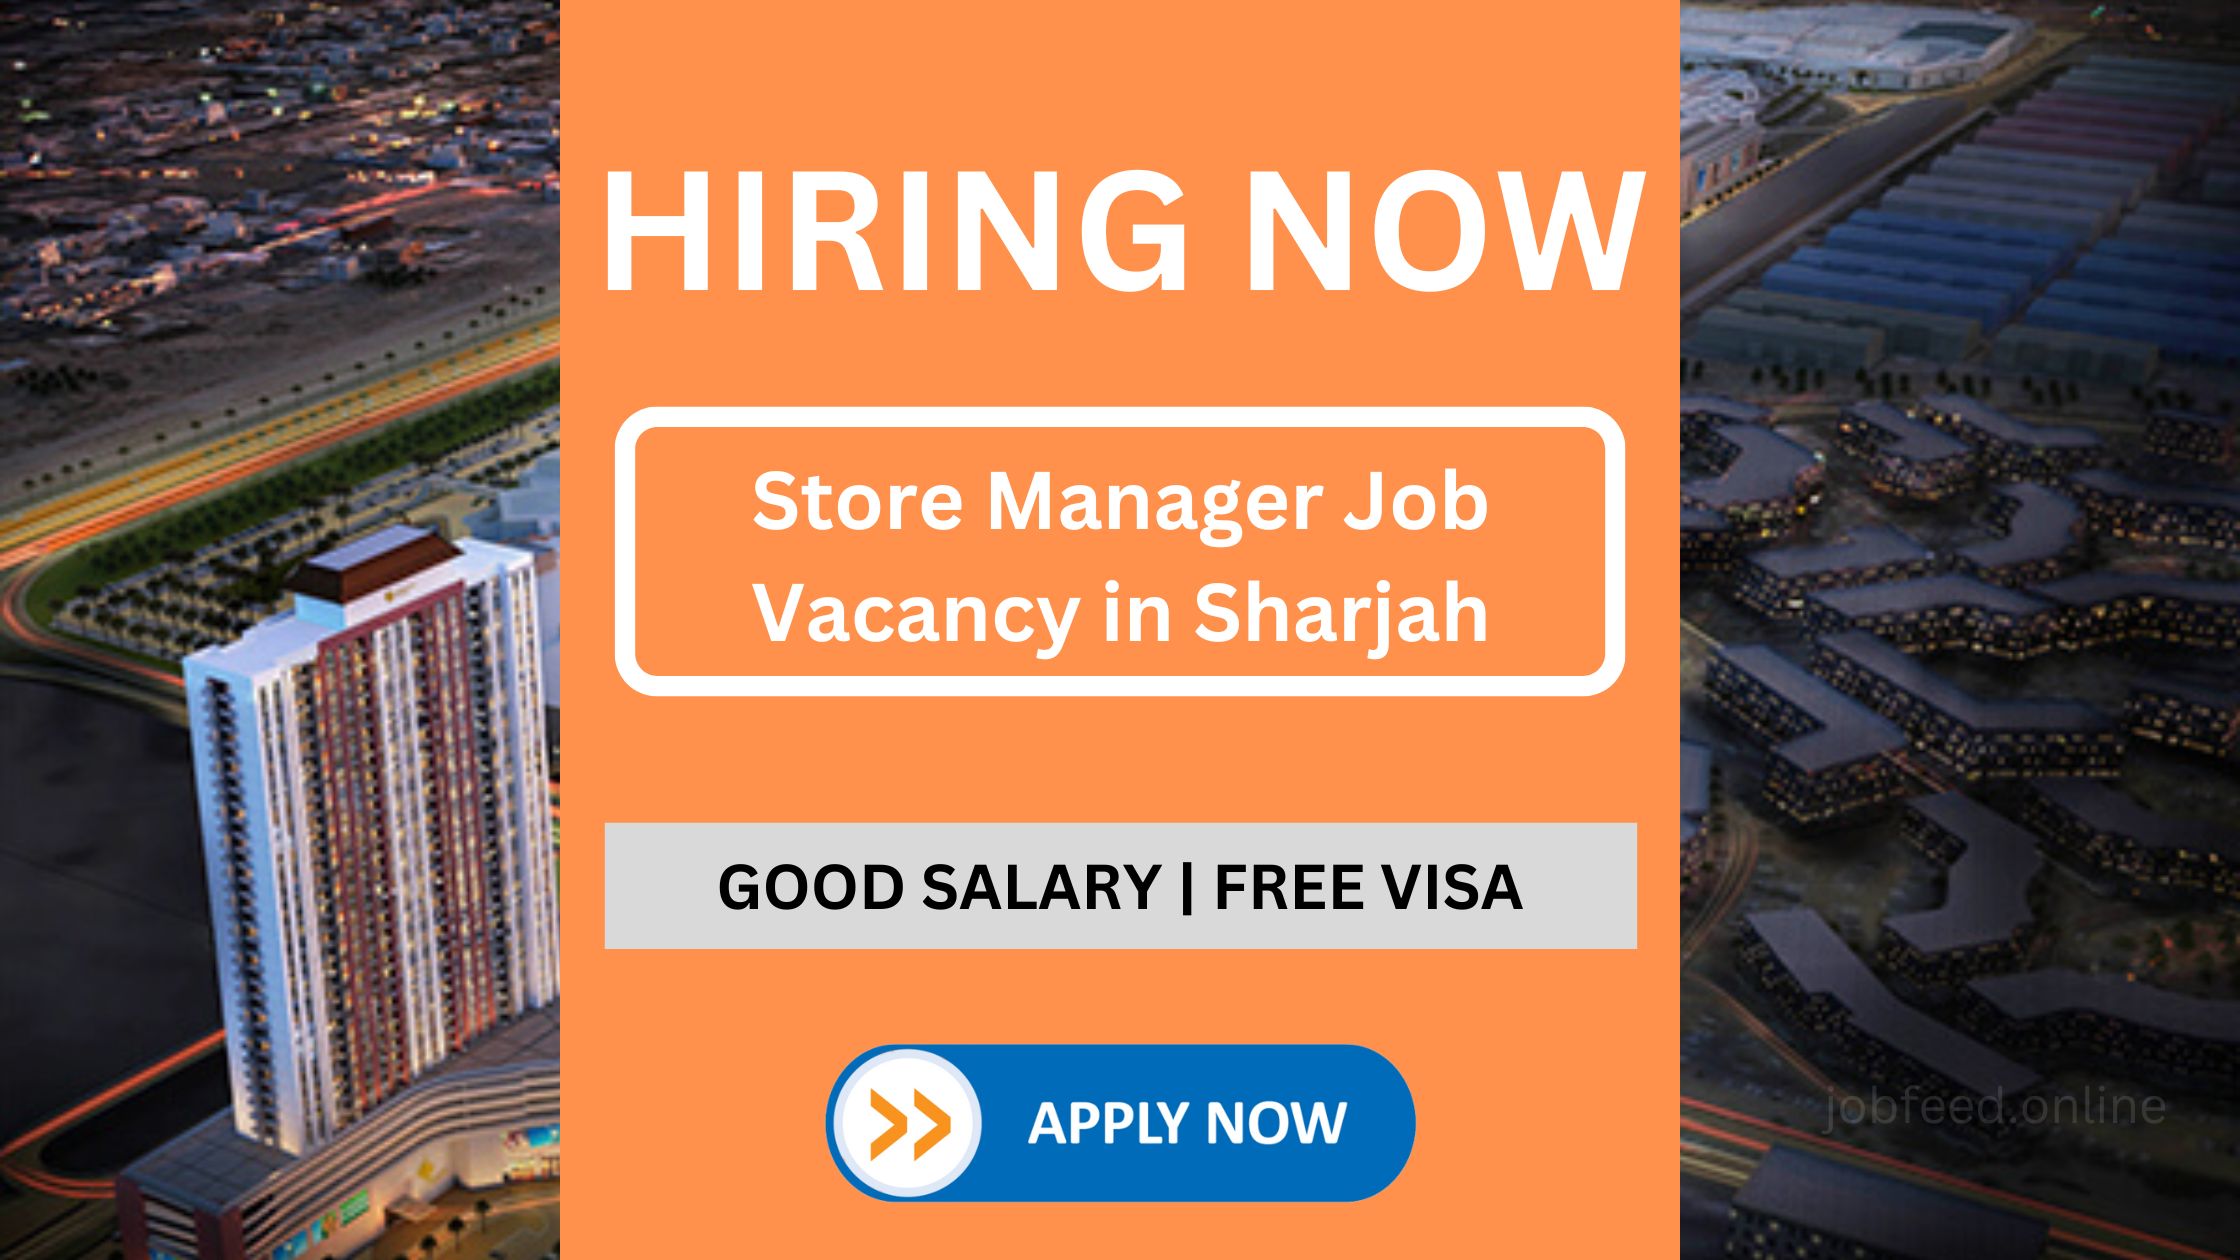 Store Manager Job Vacancy in Sharjah